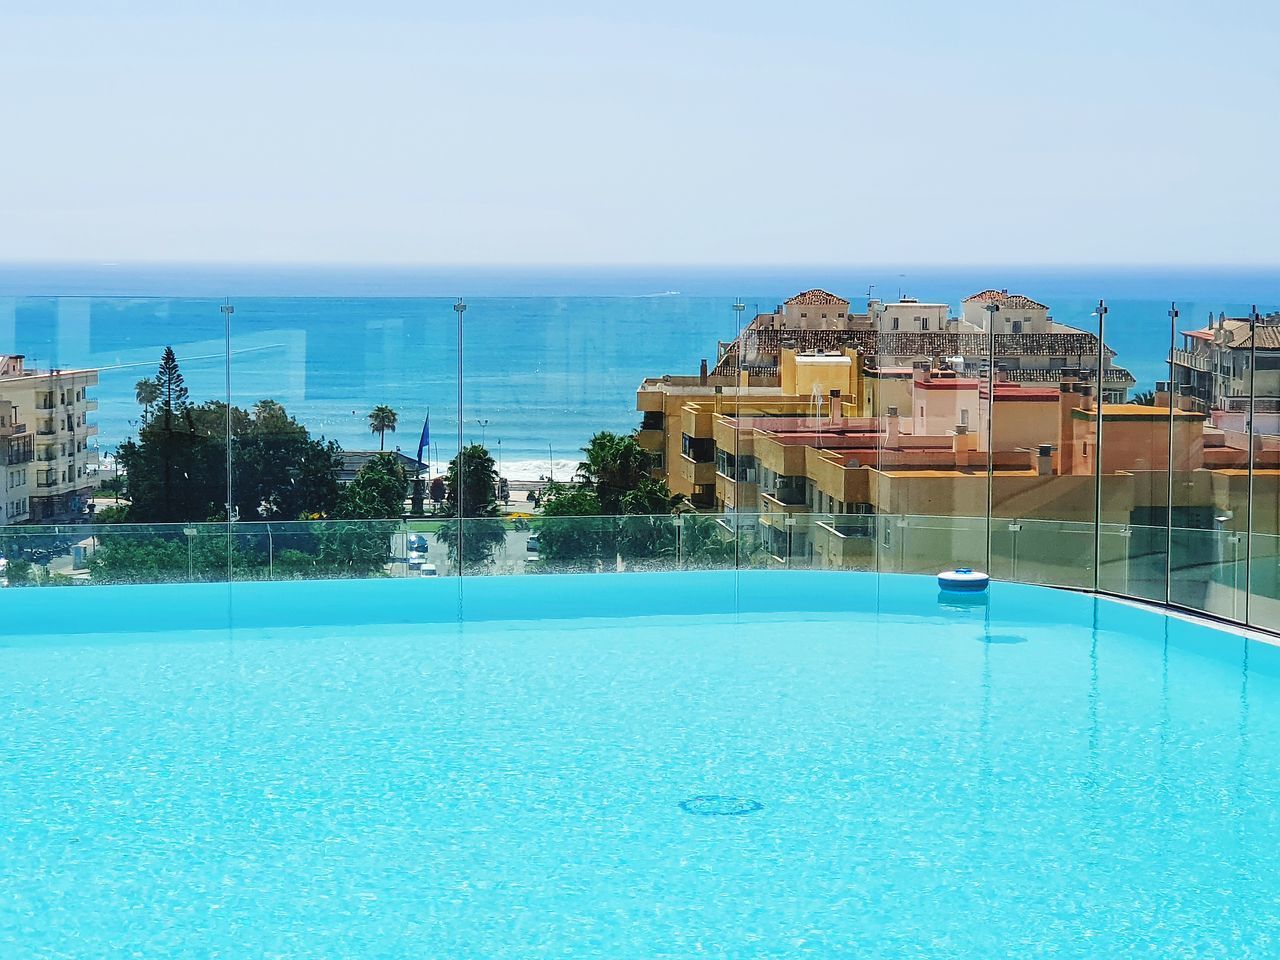 VIEW OF SWIMMING POOL BY SEA AGAINST SKY